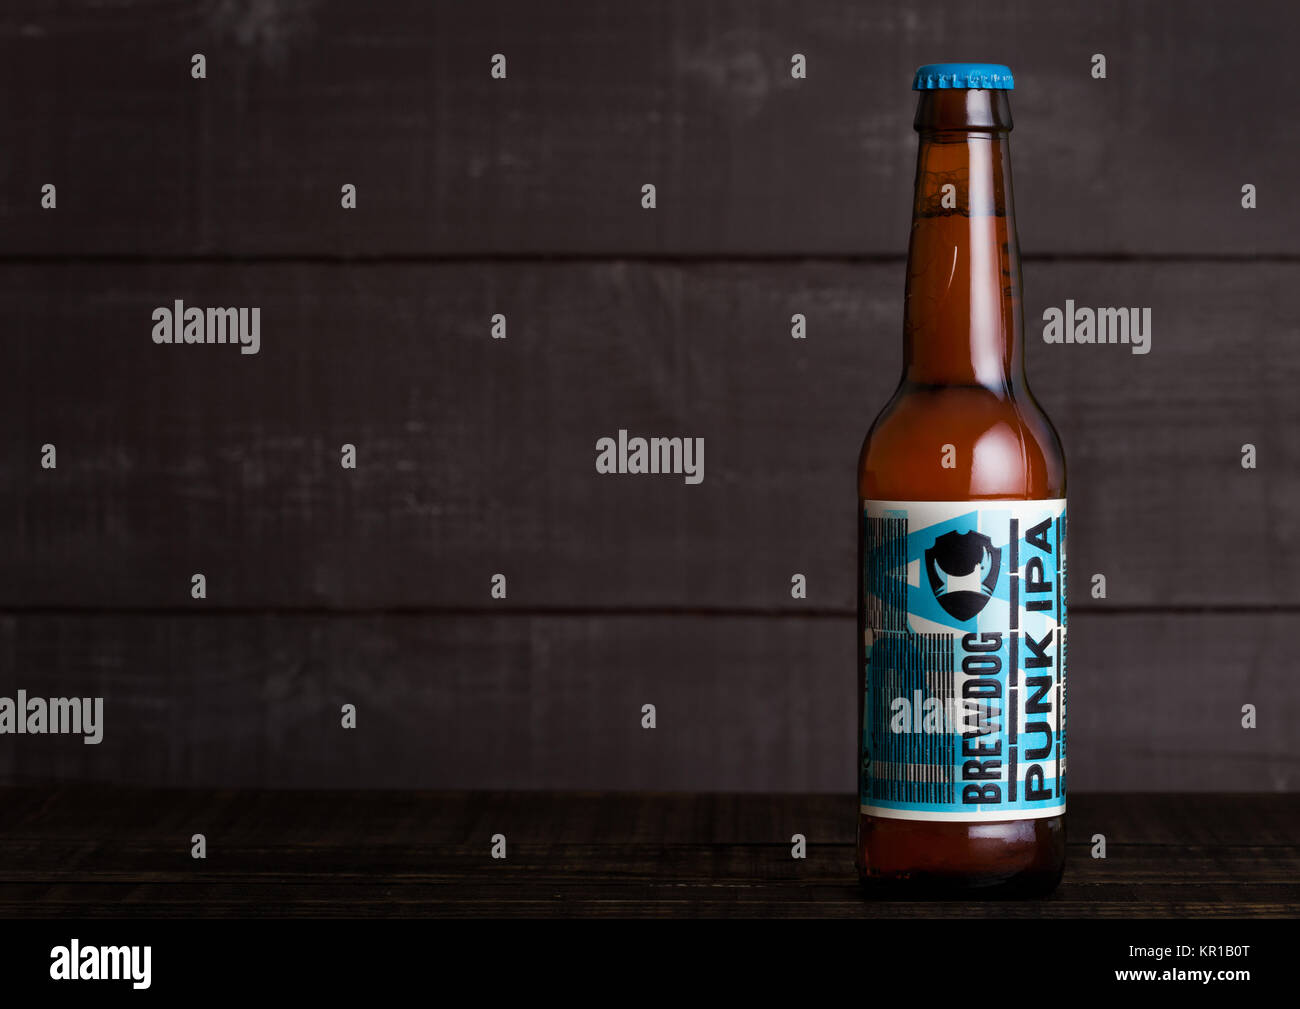 LONDON, UK - DECEMBER 15, 2017: Bottle of Punk Ipa post modern classic, from the Brewdog brewery on wooden background. Stock Photo